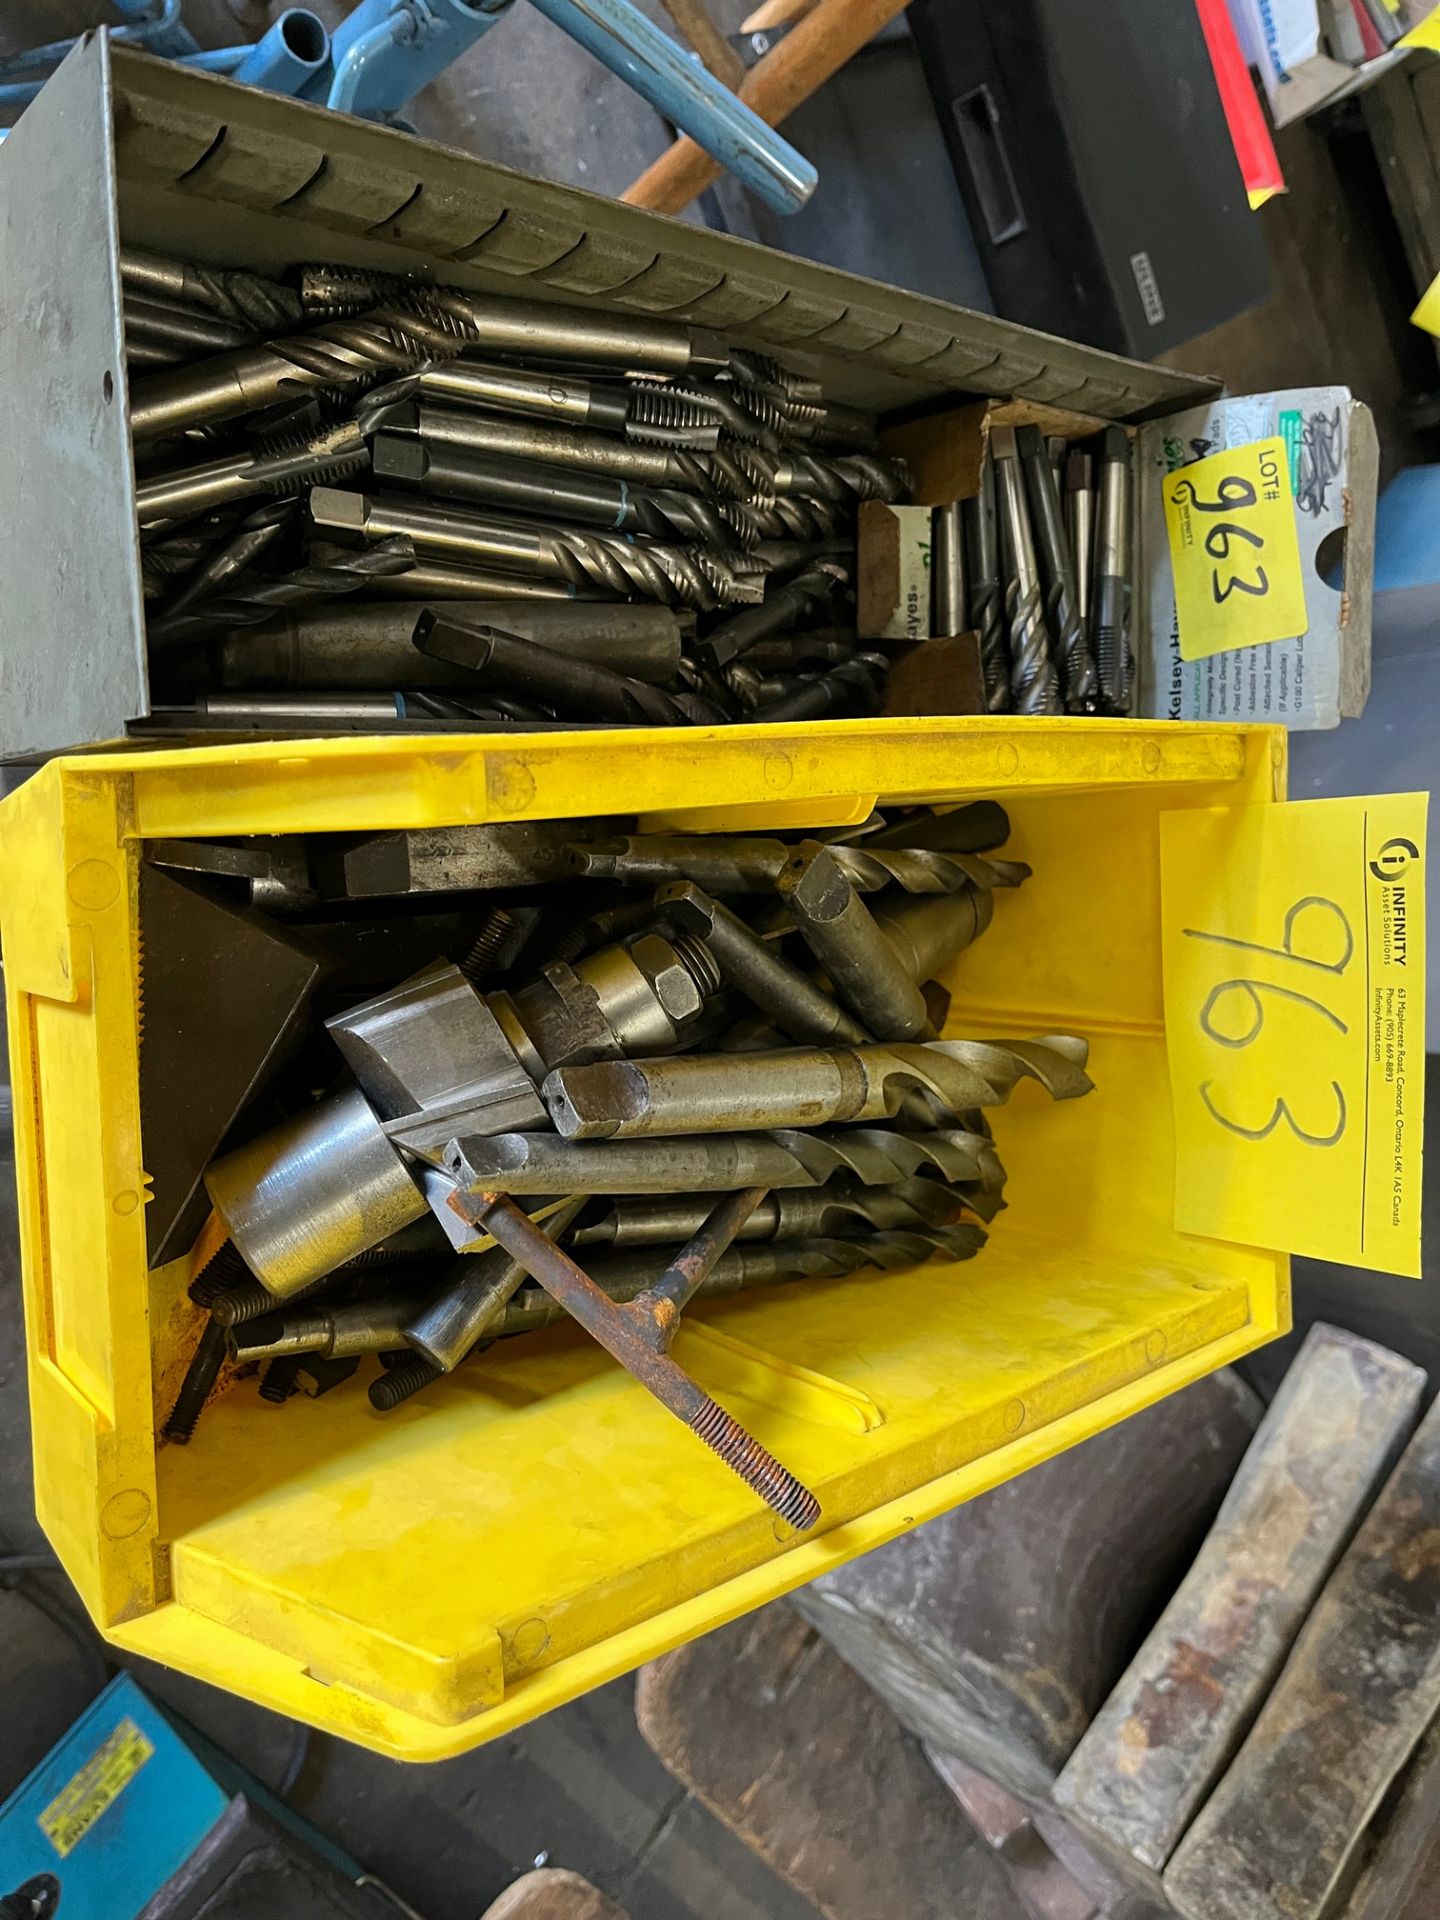 LOT OF DRILLS, TAPS, TOOL HOLDERS